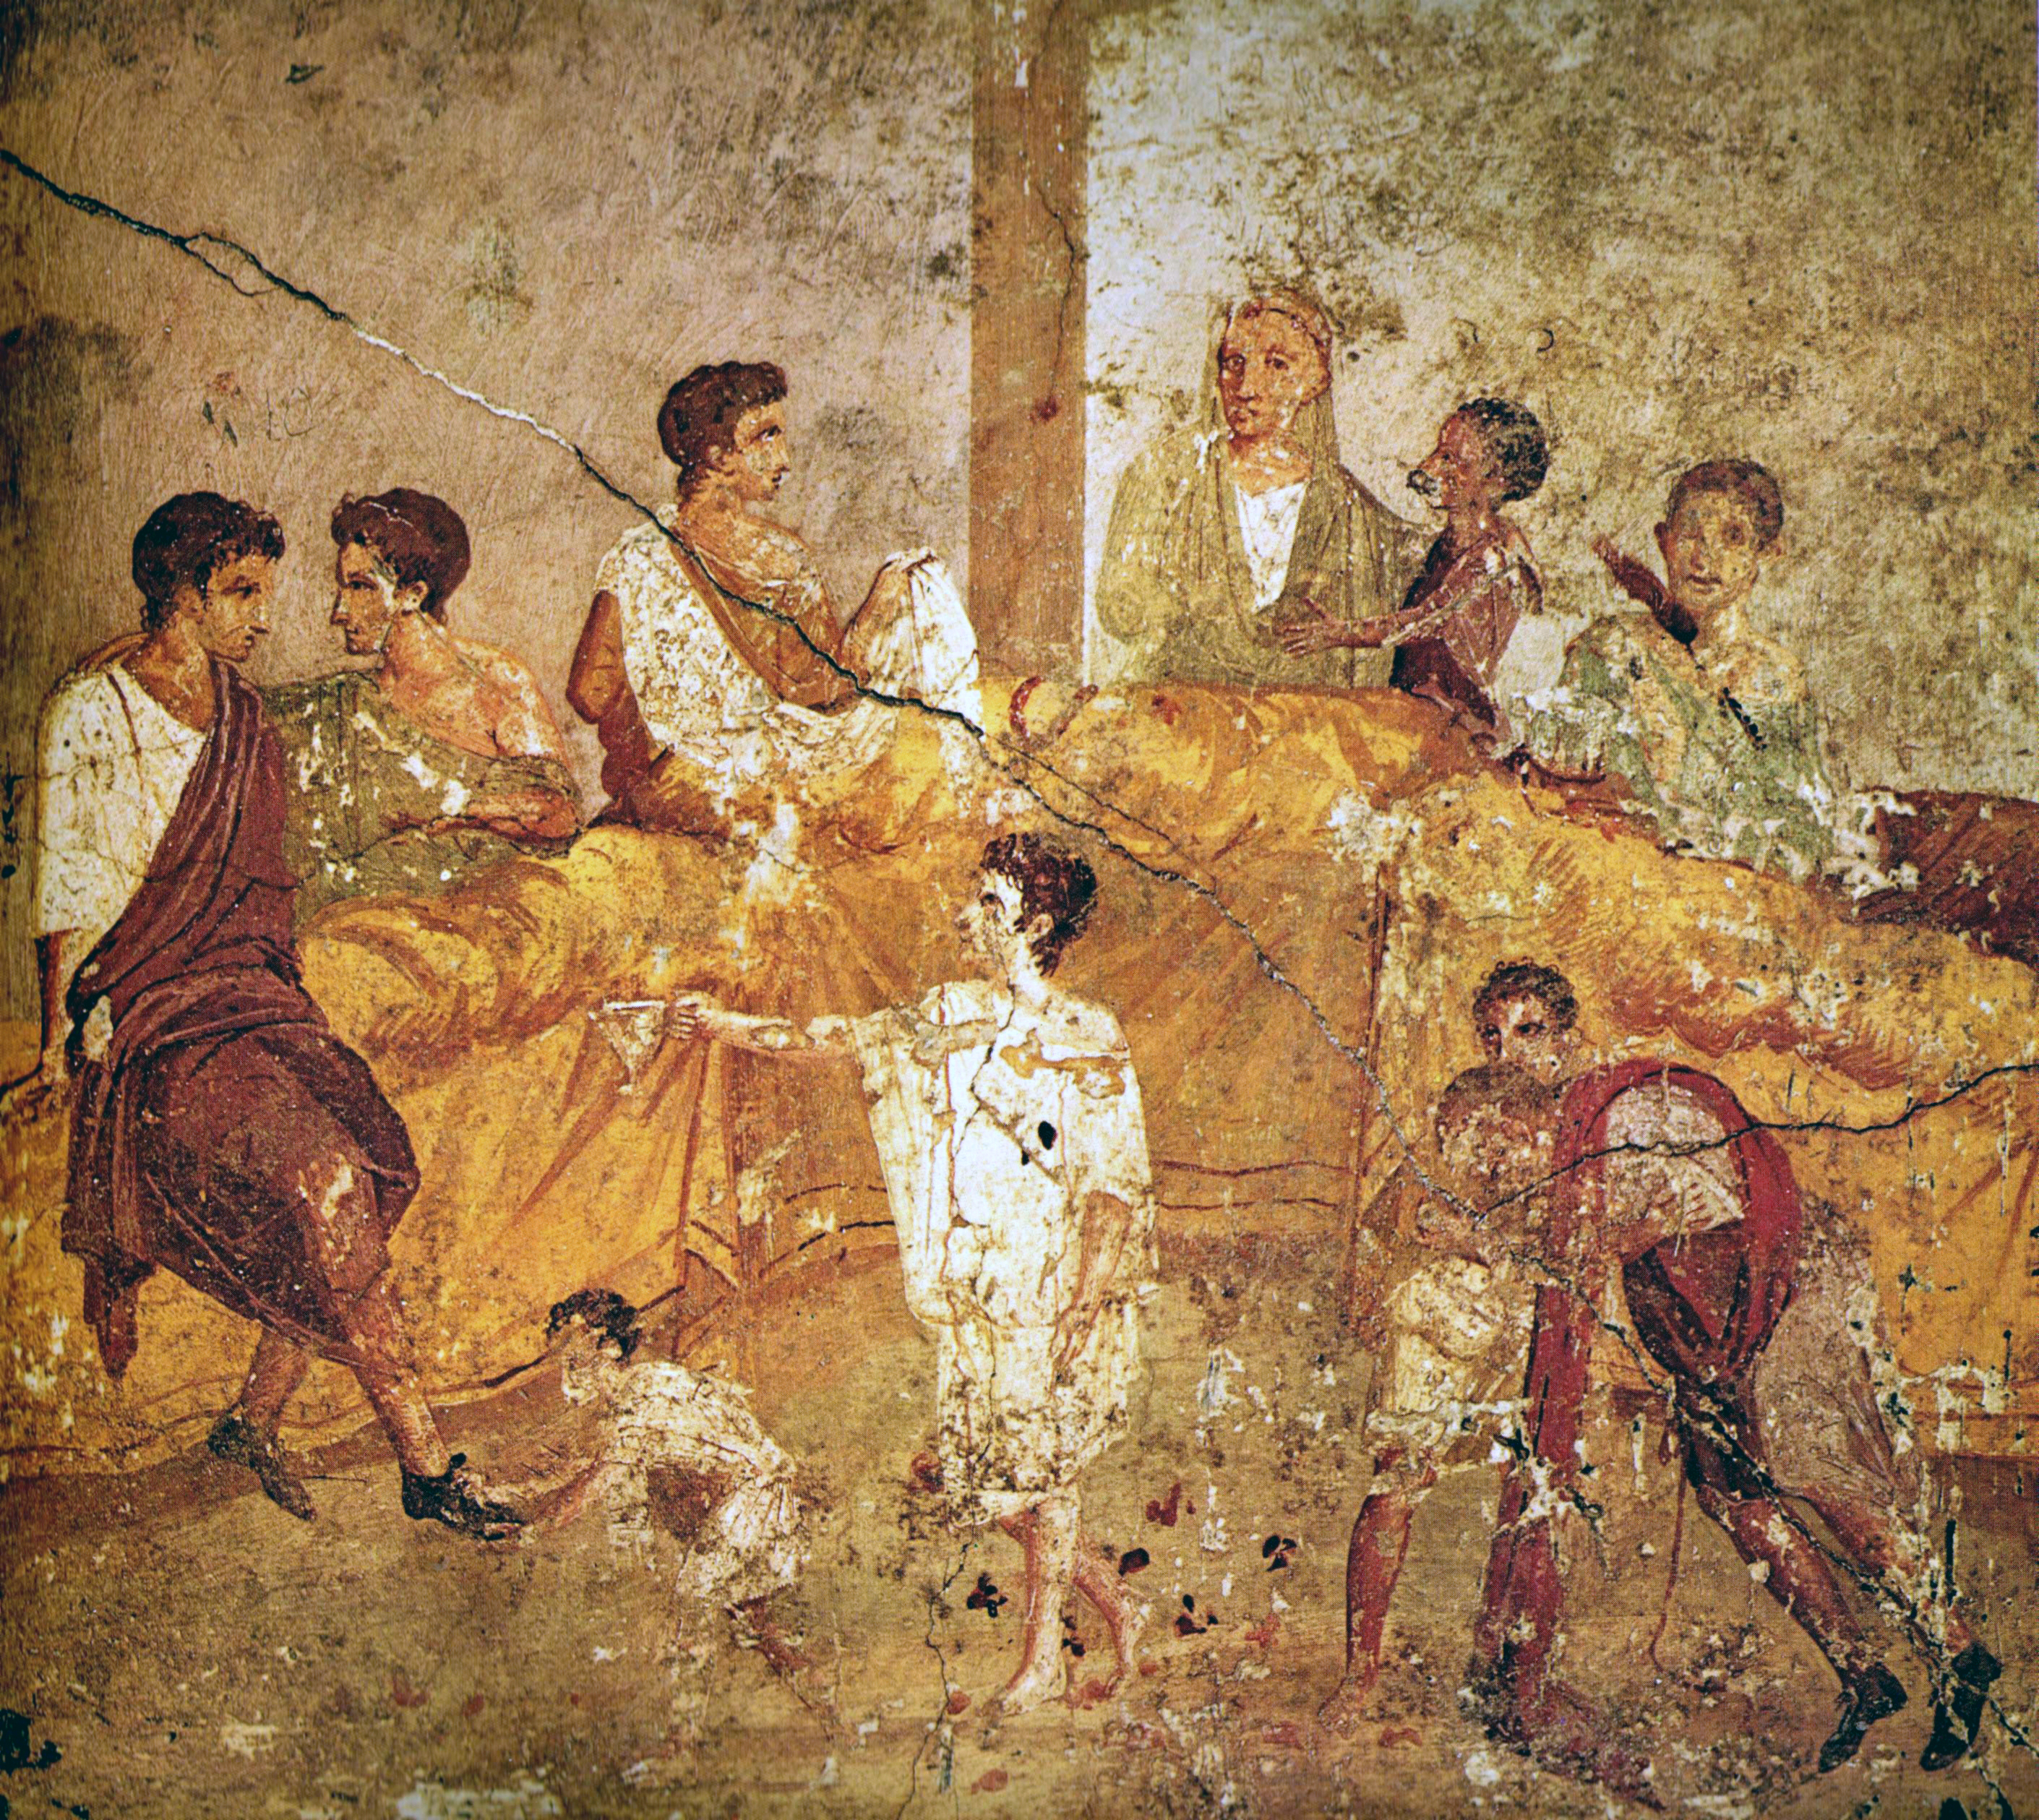 Painting from Pompeii, now in the Museo Archeologico Nazionale (Naples), showing a banquet or family ceremony.